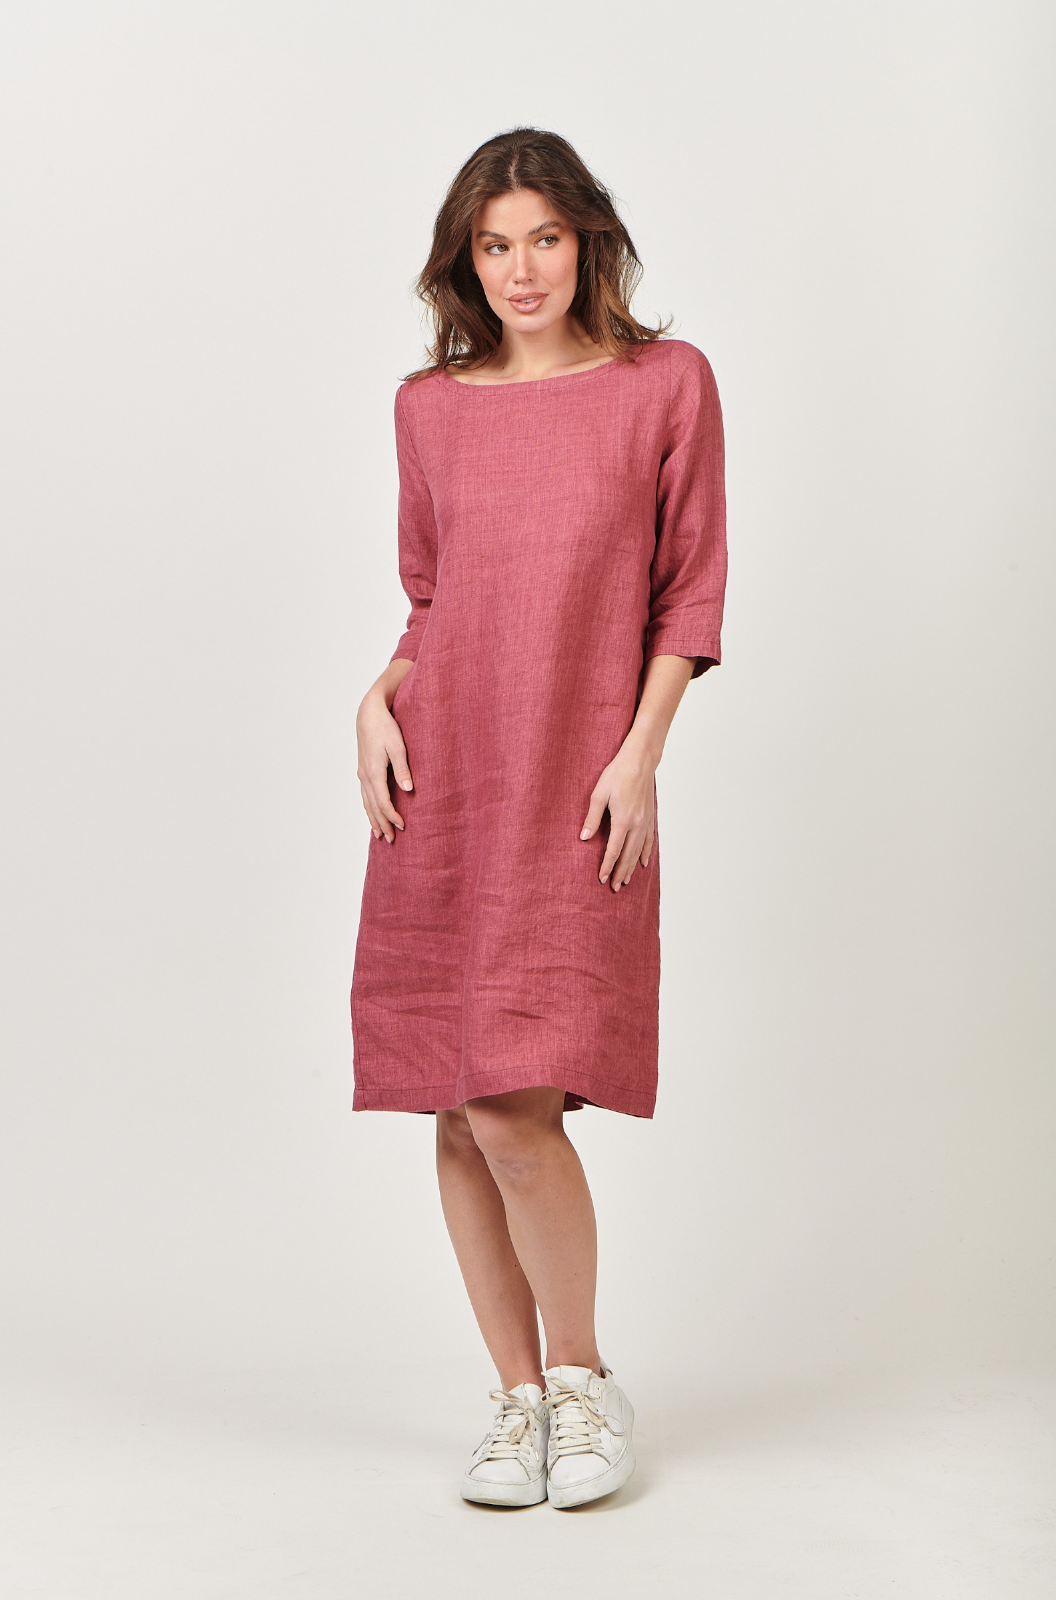 Naturals by O & J Boat Neck Linen Dress in Rhubarb